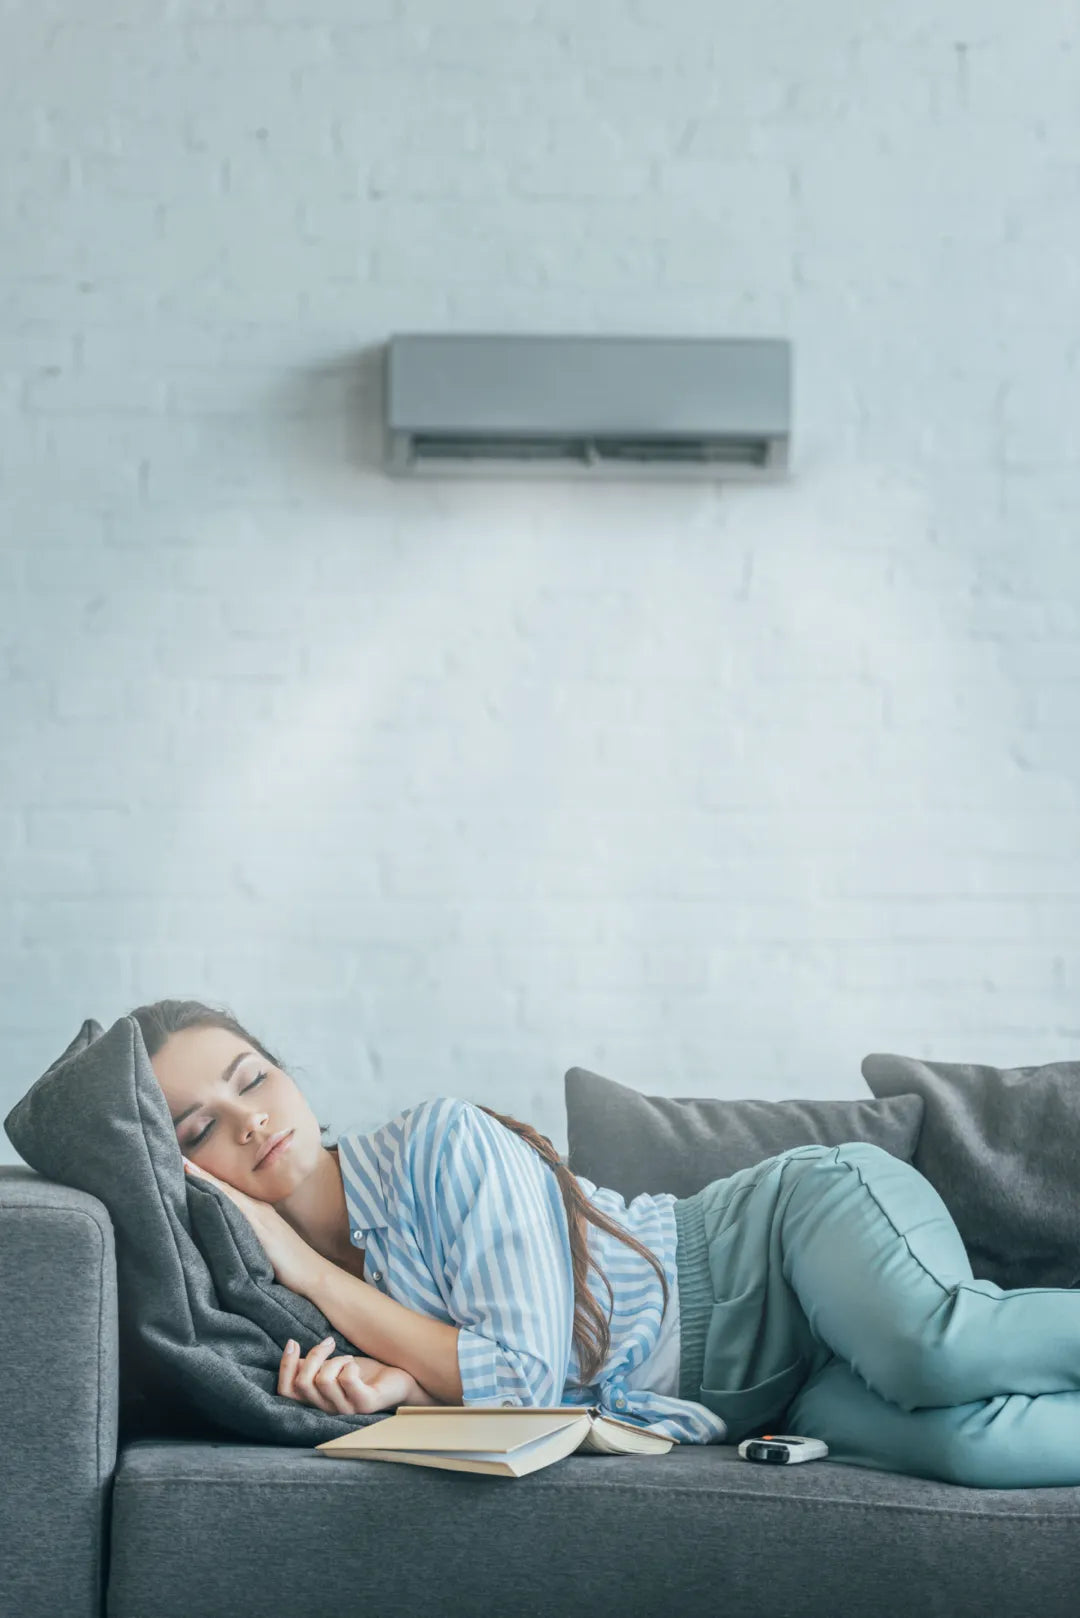 A woman sleeping on a sofa in a room with air conditioning.